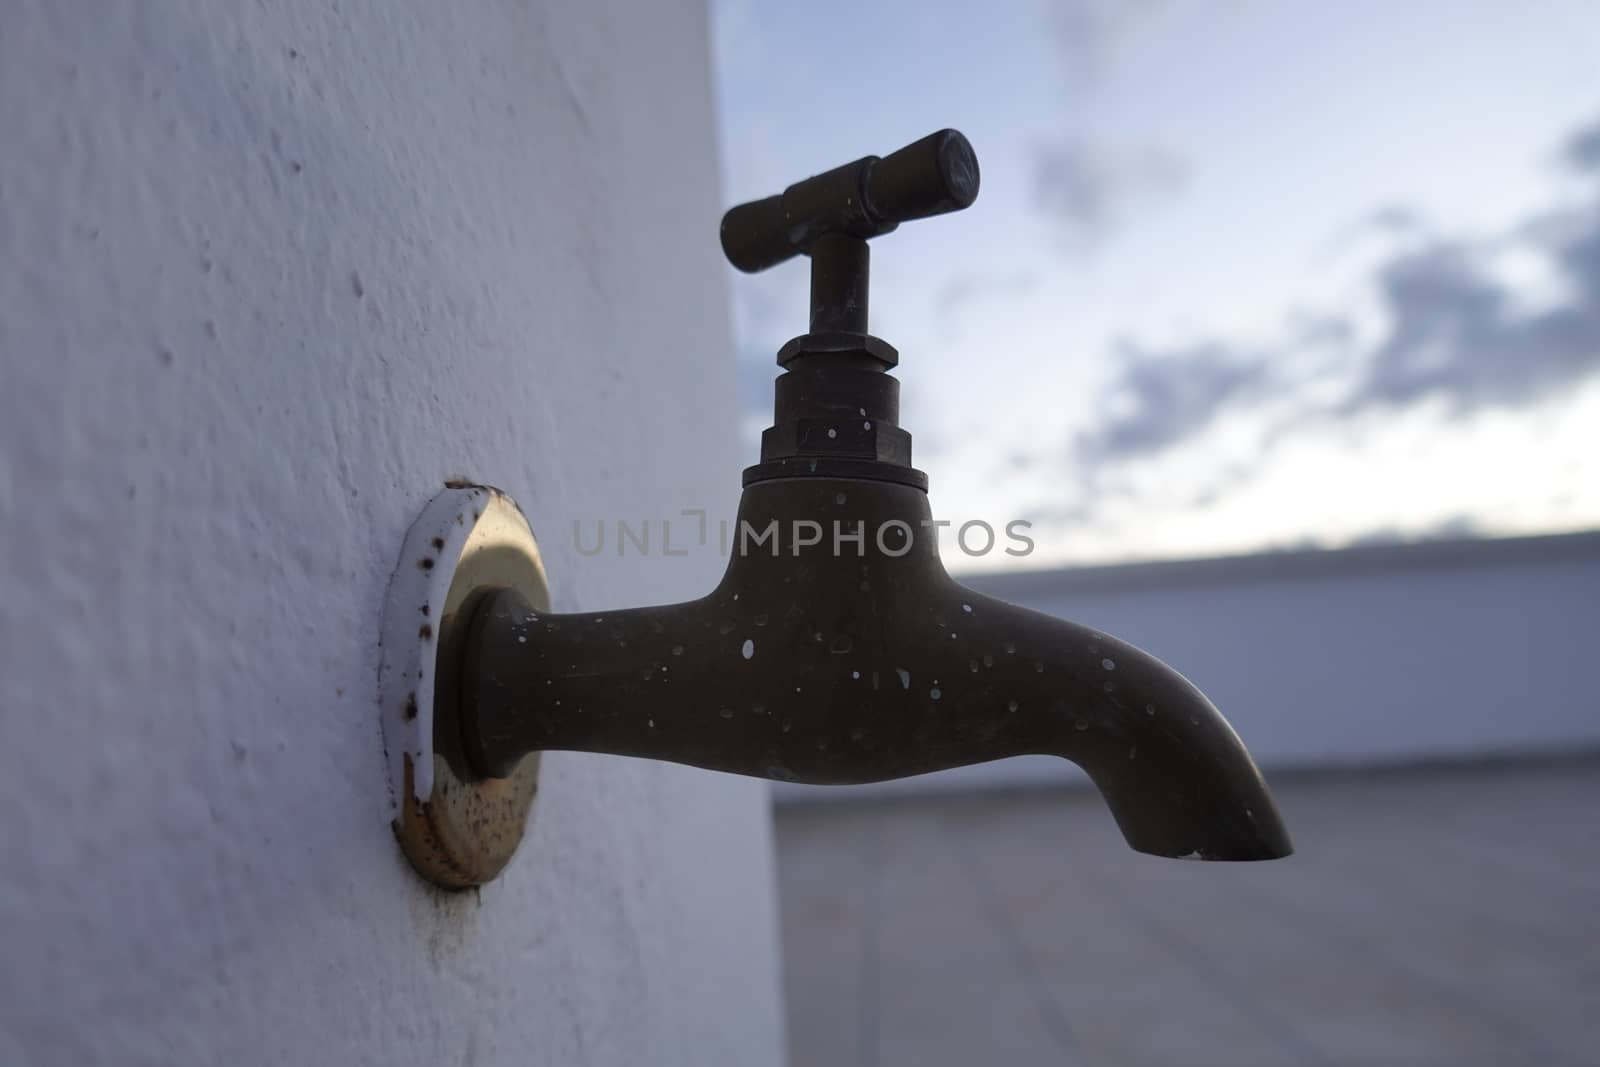 moroccan old faucet with a rustic color and white background.